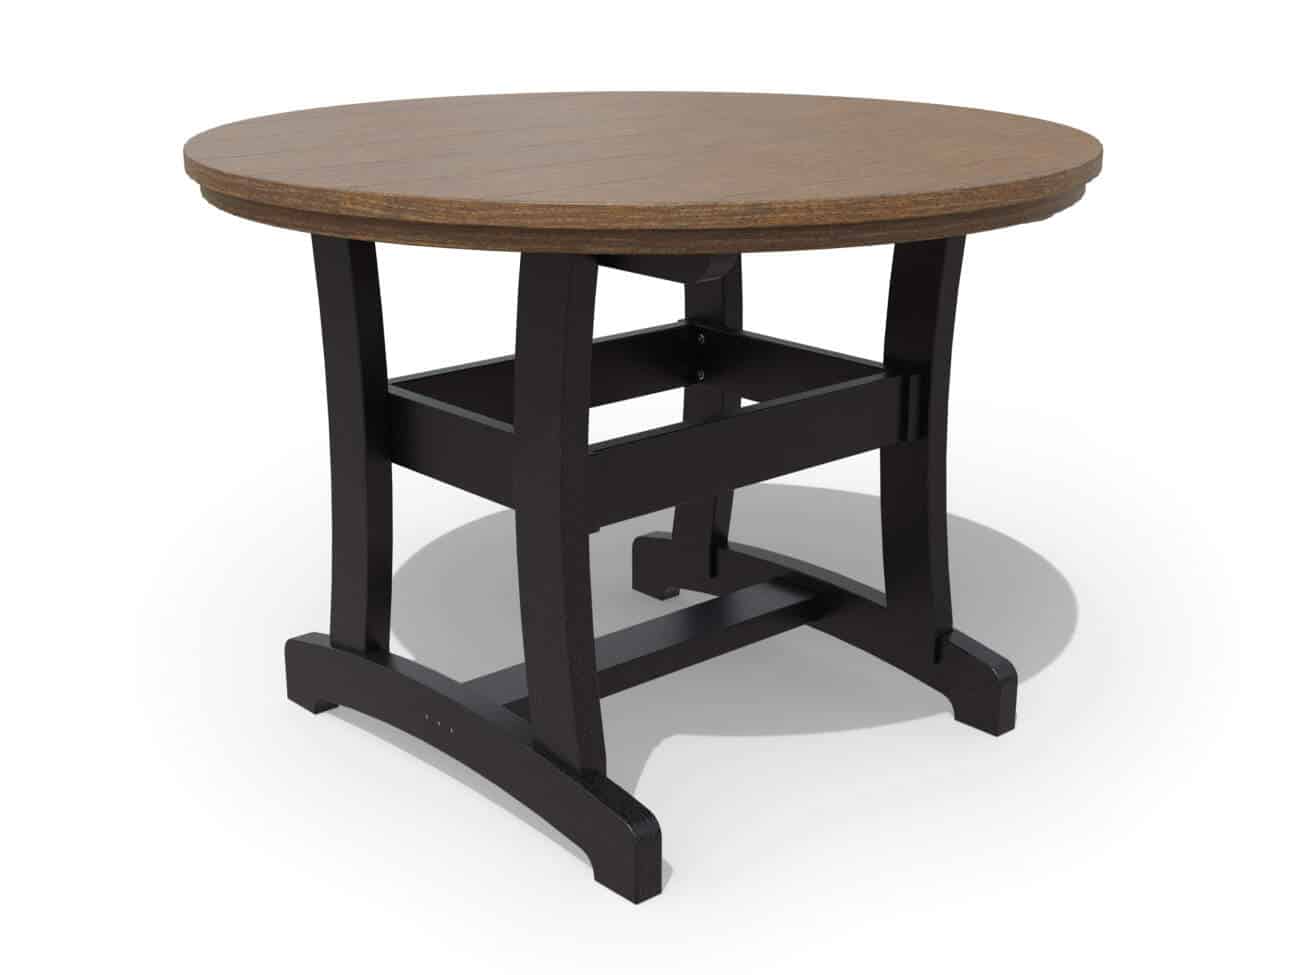 42 inch Round End Table poly wood grain